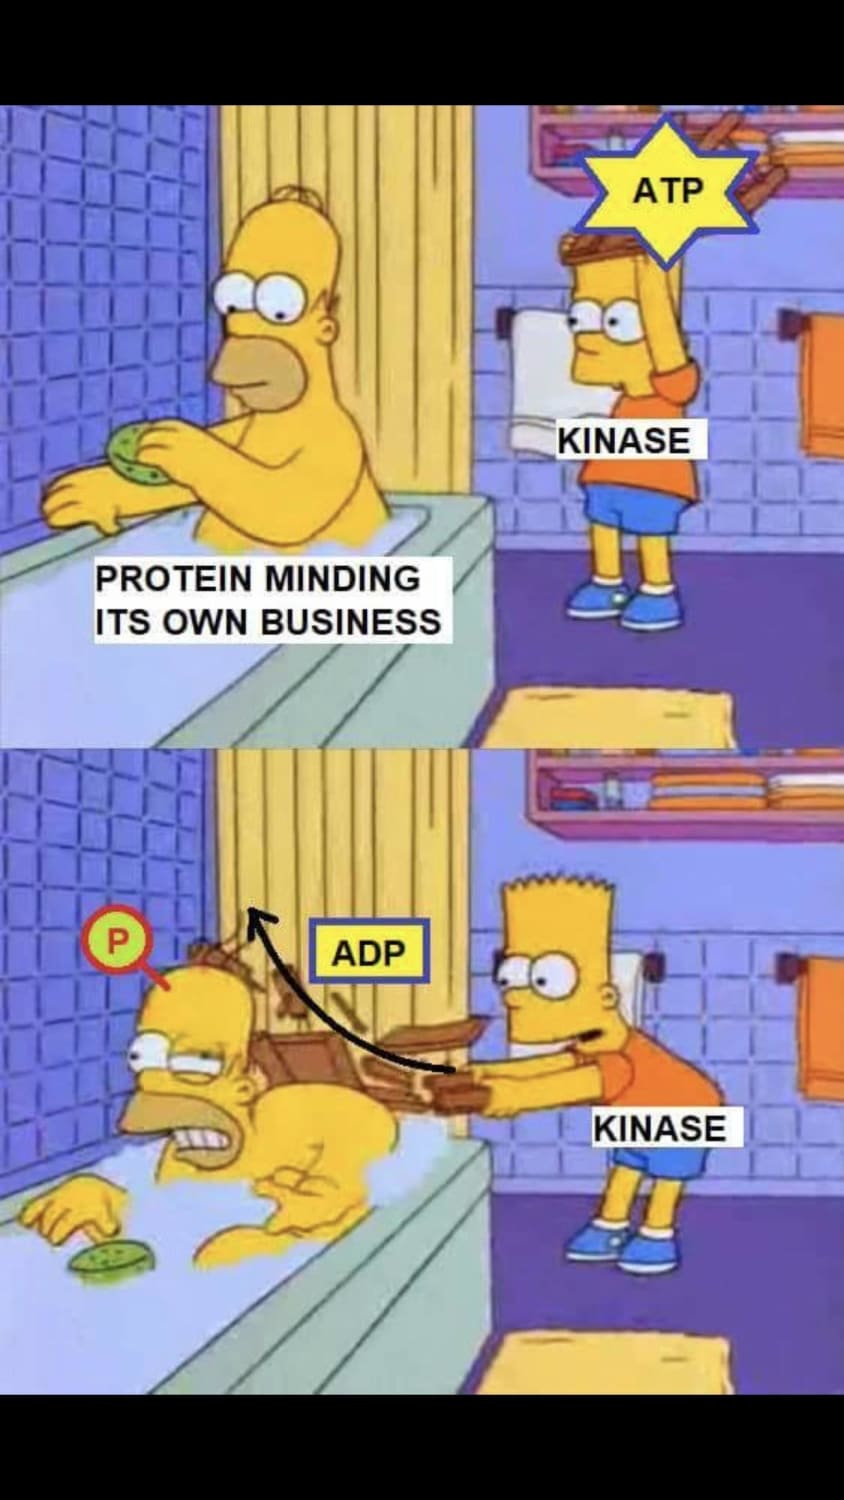 Memes that help you learn. Here’s one for anyone who is having a hard time comprehending the role of kinases. And drop more helpful memes in the comments.